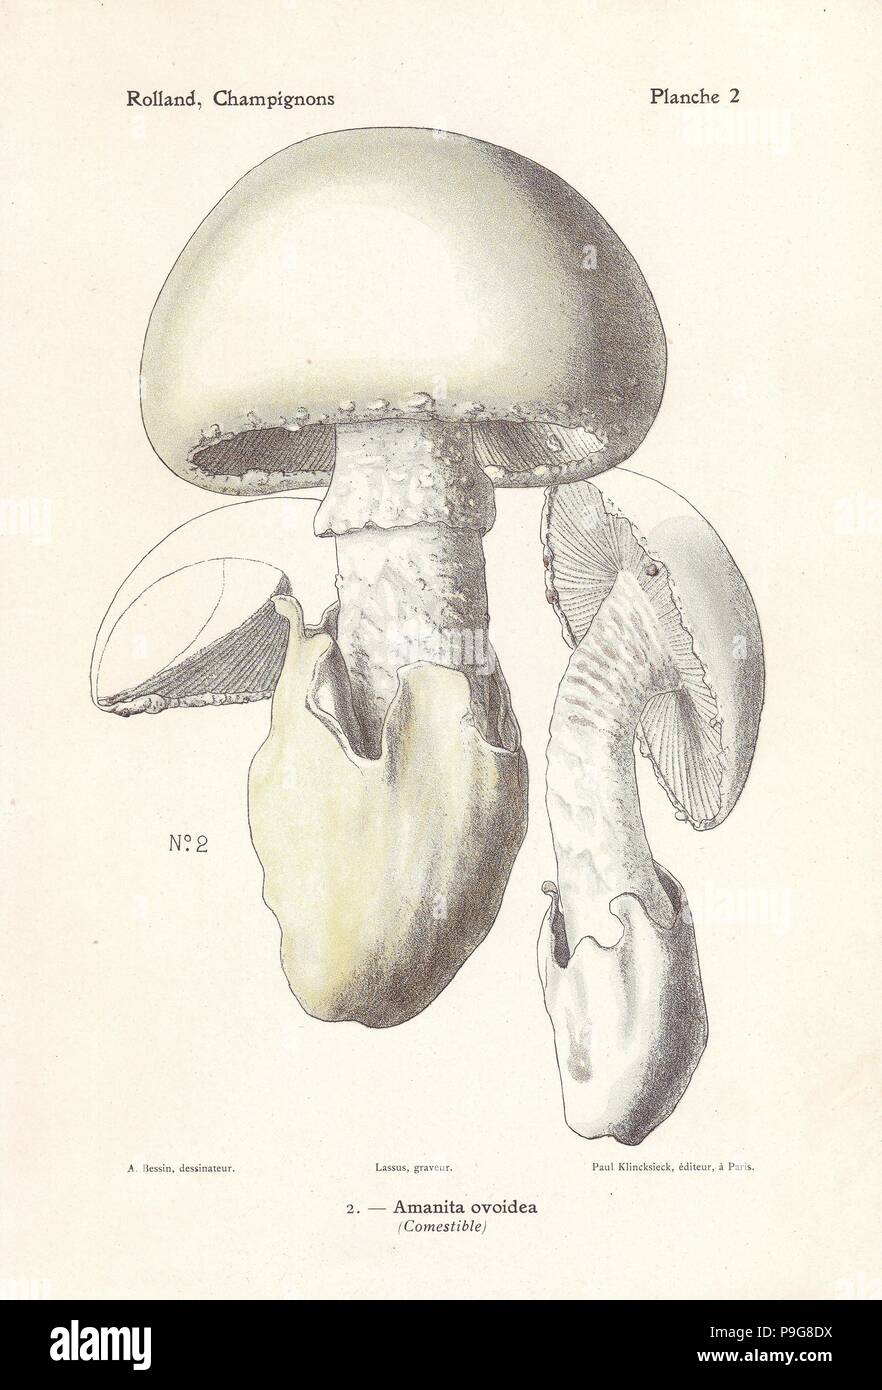 European white egg mushroom, Amanita ovoidea. Chromolithograph by Lassus after an illustration by A. Bessin from Leon Rolland's Guide to Mushrooms from France, Switzerland and Belgium, Atlas des Champignons, Paul Klincksieck, Paris, 1910. Stock Photo